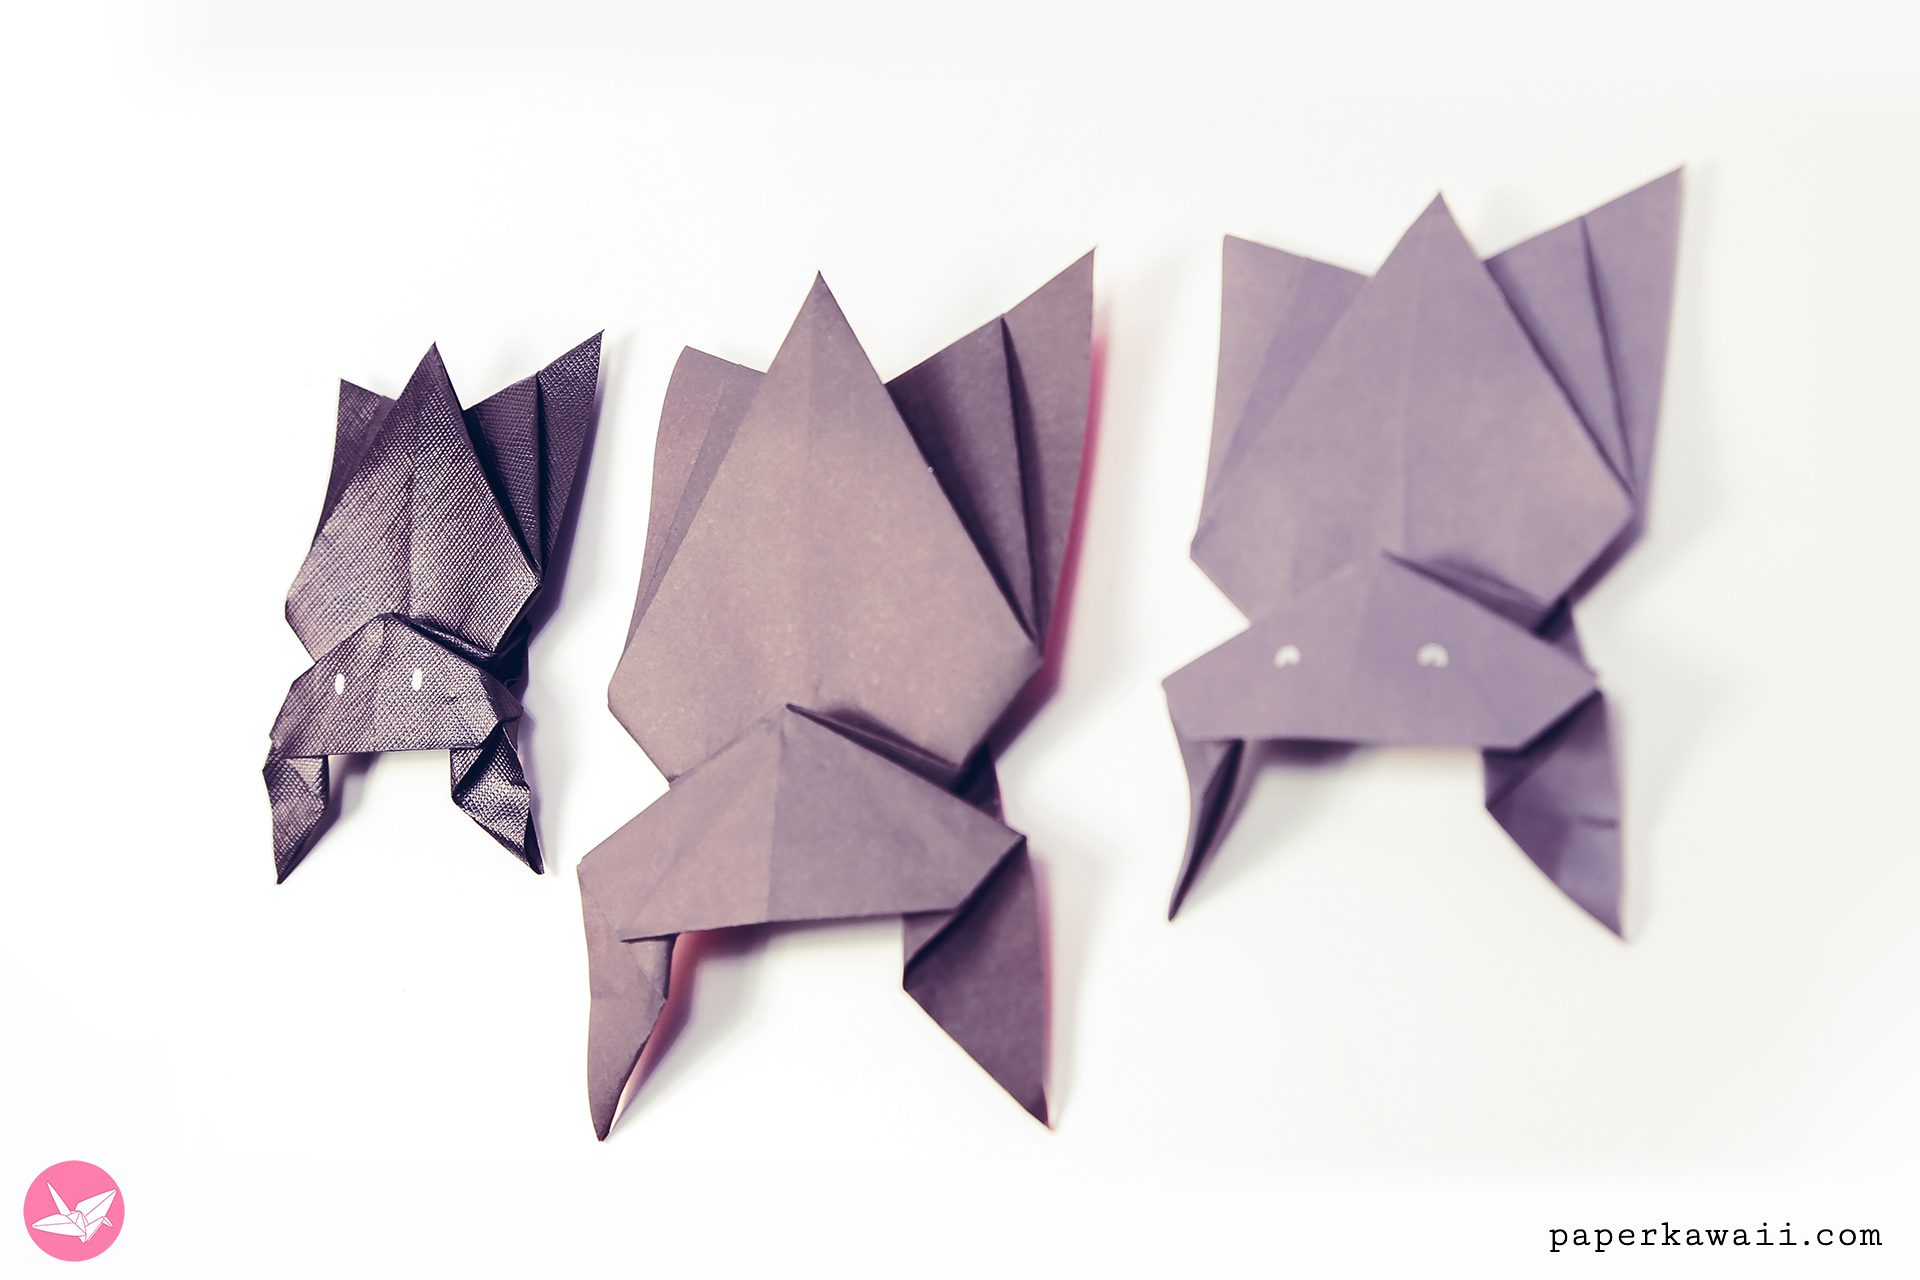 Death Note Origami Book Video Instructions - Paper Kawaii